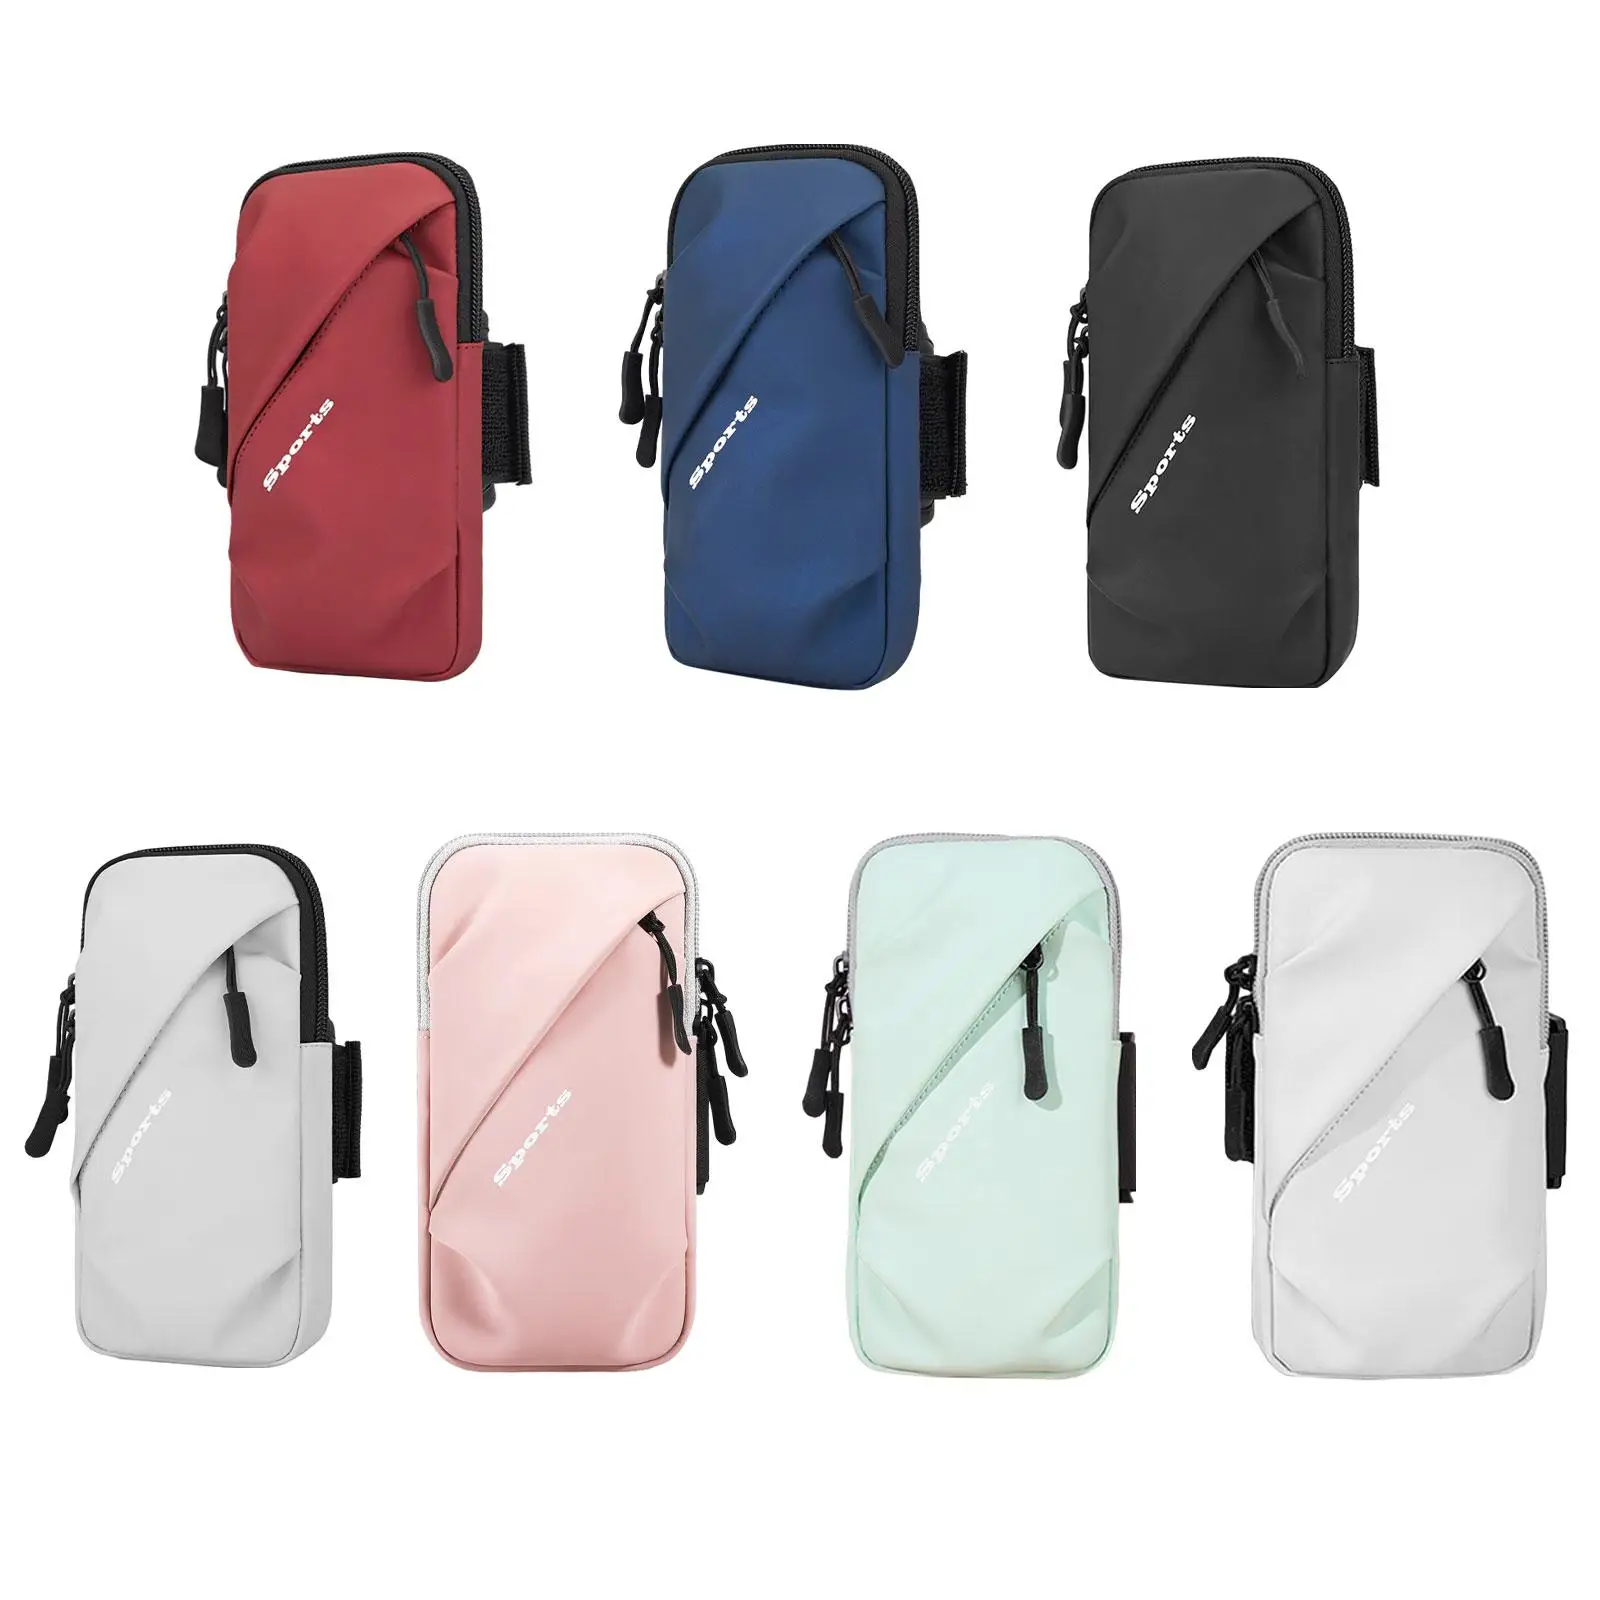 

Phone Armband Bag Phone Holder Pouch Cellphone Holder Sports Arm Bag Phone Wristband for Running Jogging Hiking Exercise